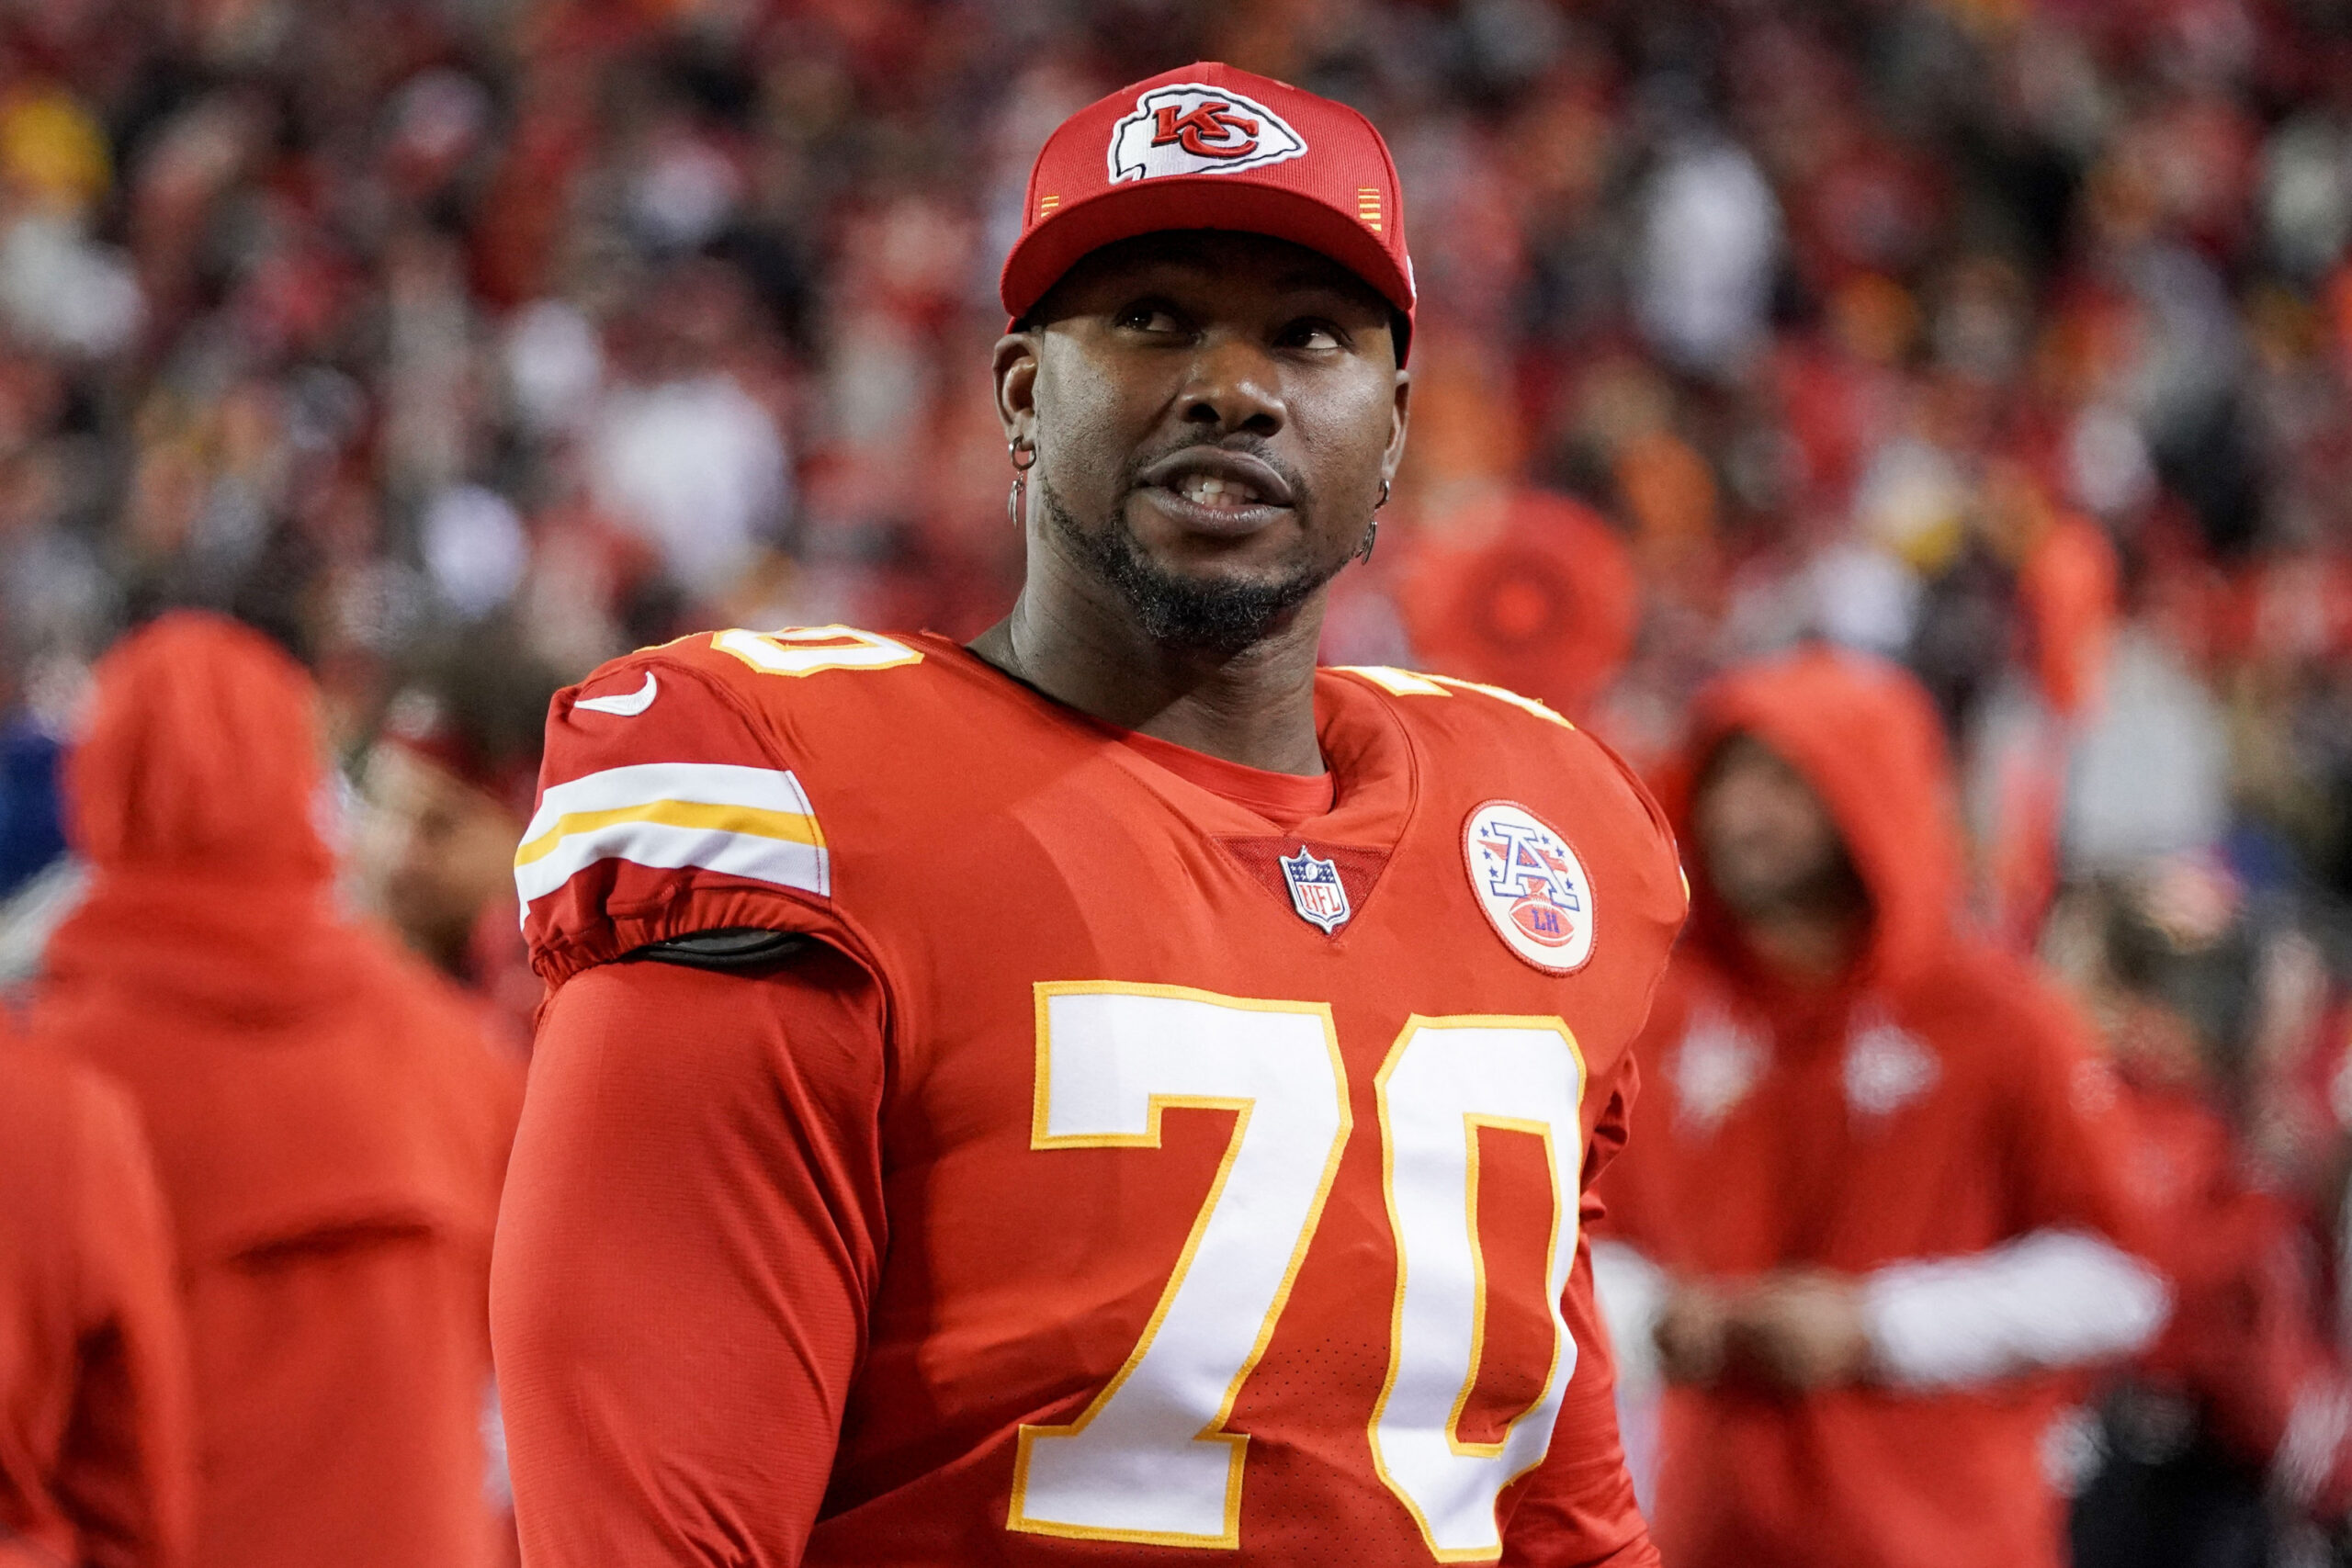 Dec 5, 2021; Kansas City, Missouri, USA; Kansas City Chiefs offensive tackle Prince Tega Wanogho (70) on the sidelines against the Denver Broncos during the game at GEHA Field at Arrowhead Stadium. Mandatory Credit: Denny Medley-USA TODAY Sports